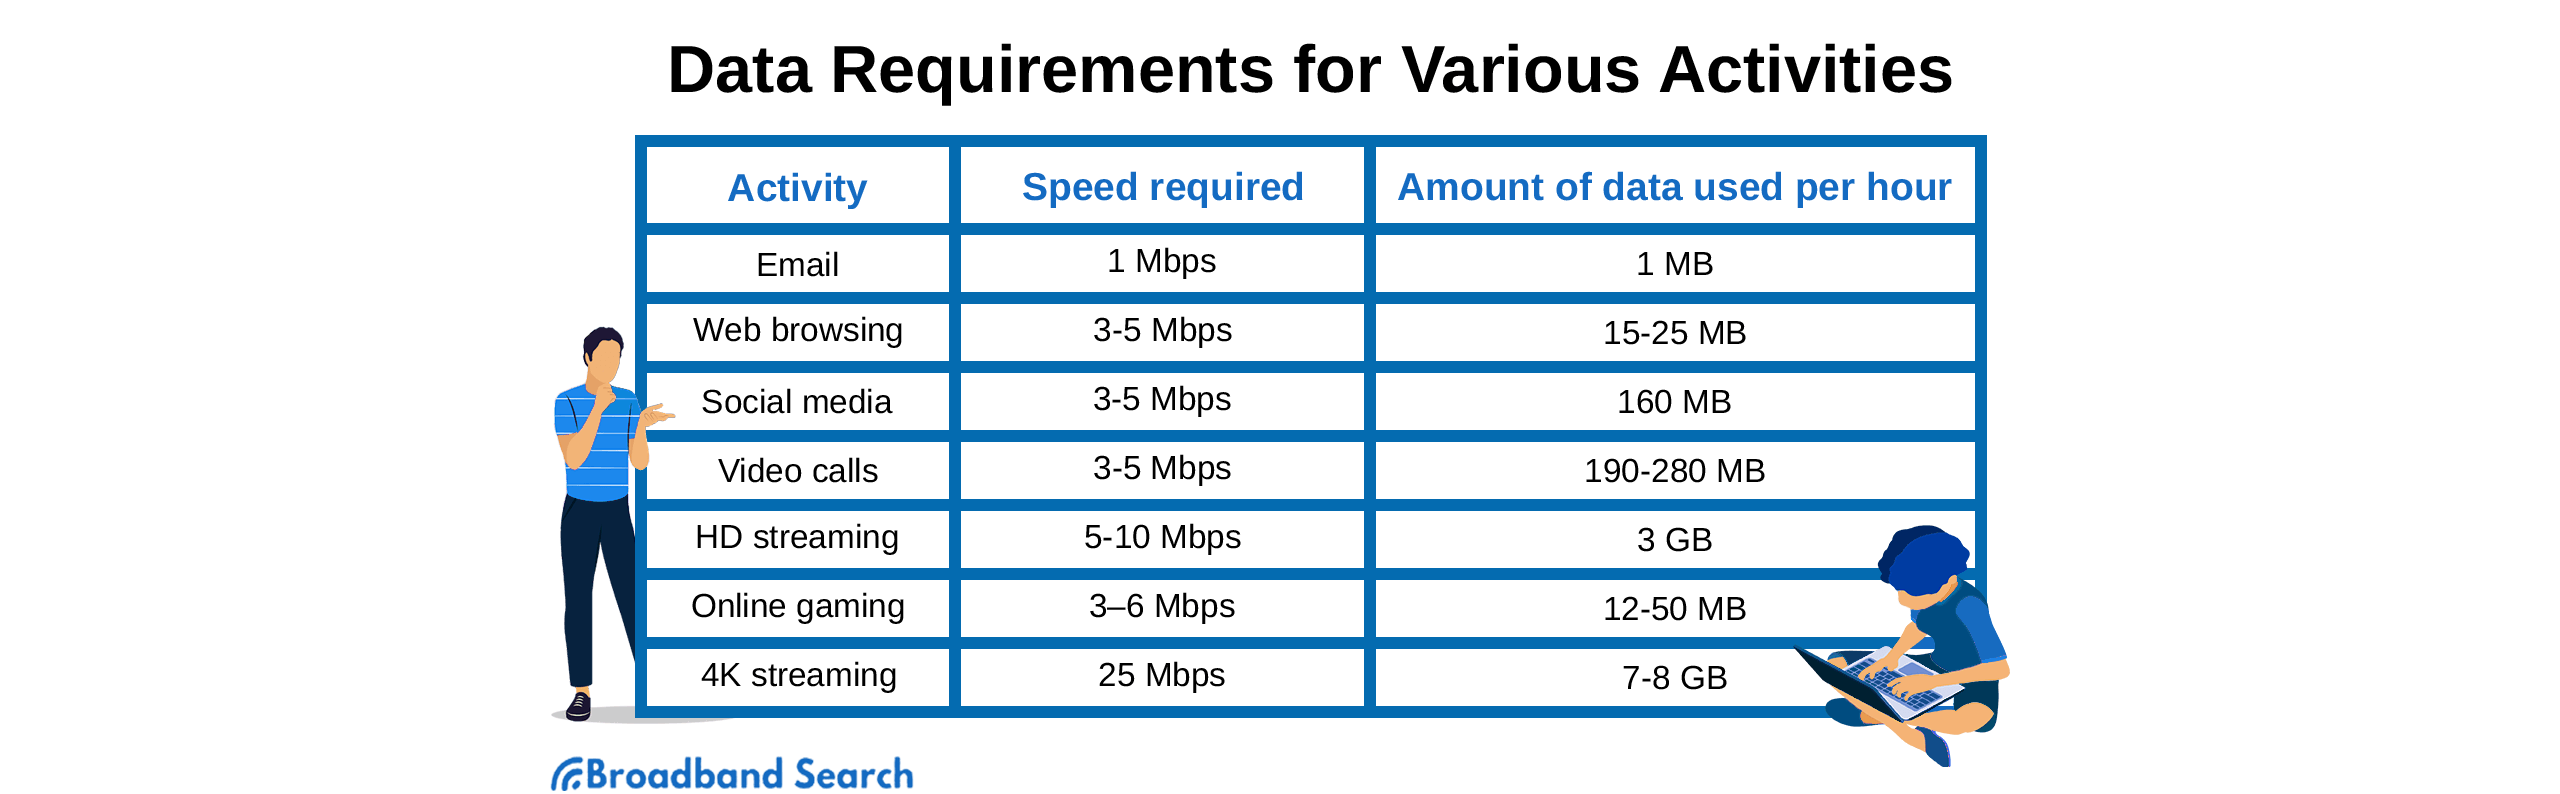 Data requirements for various activities